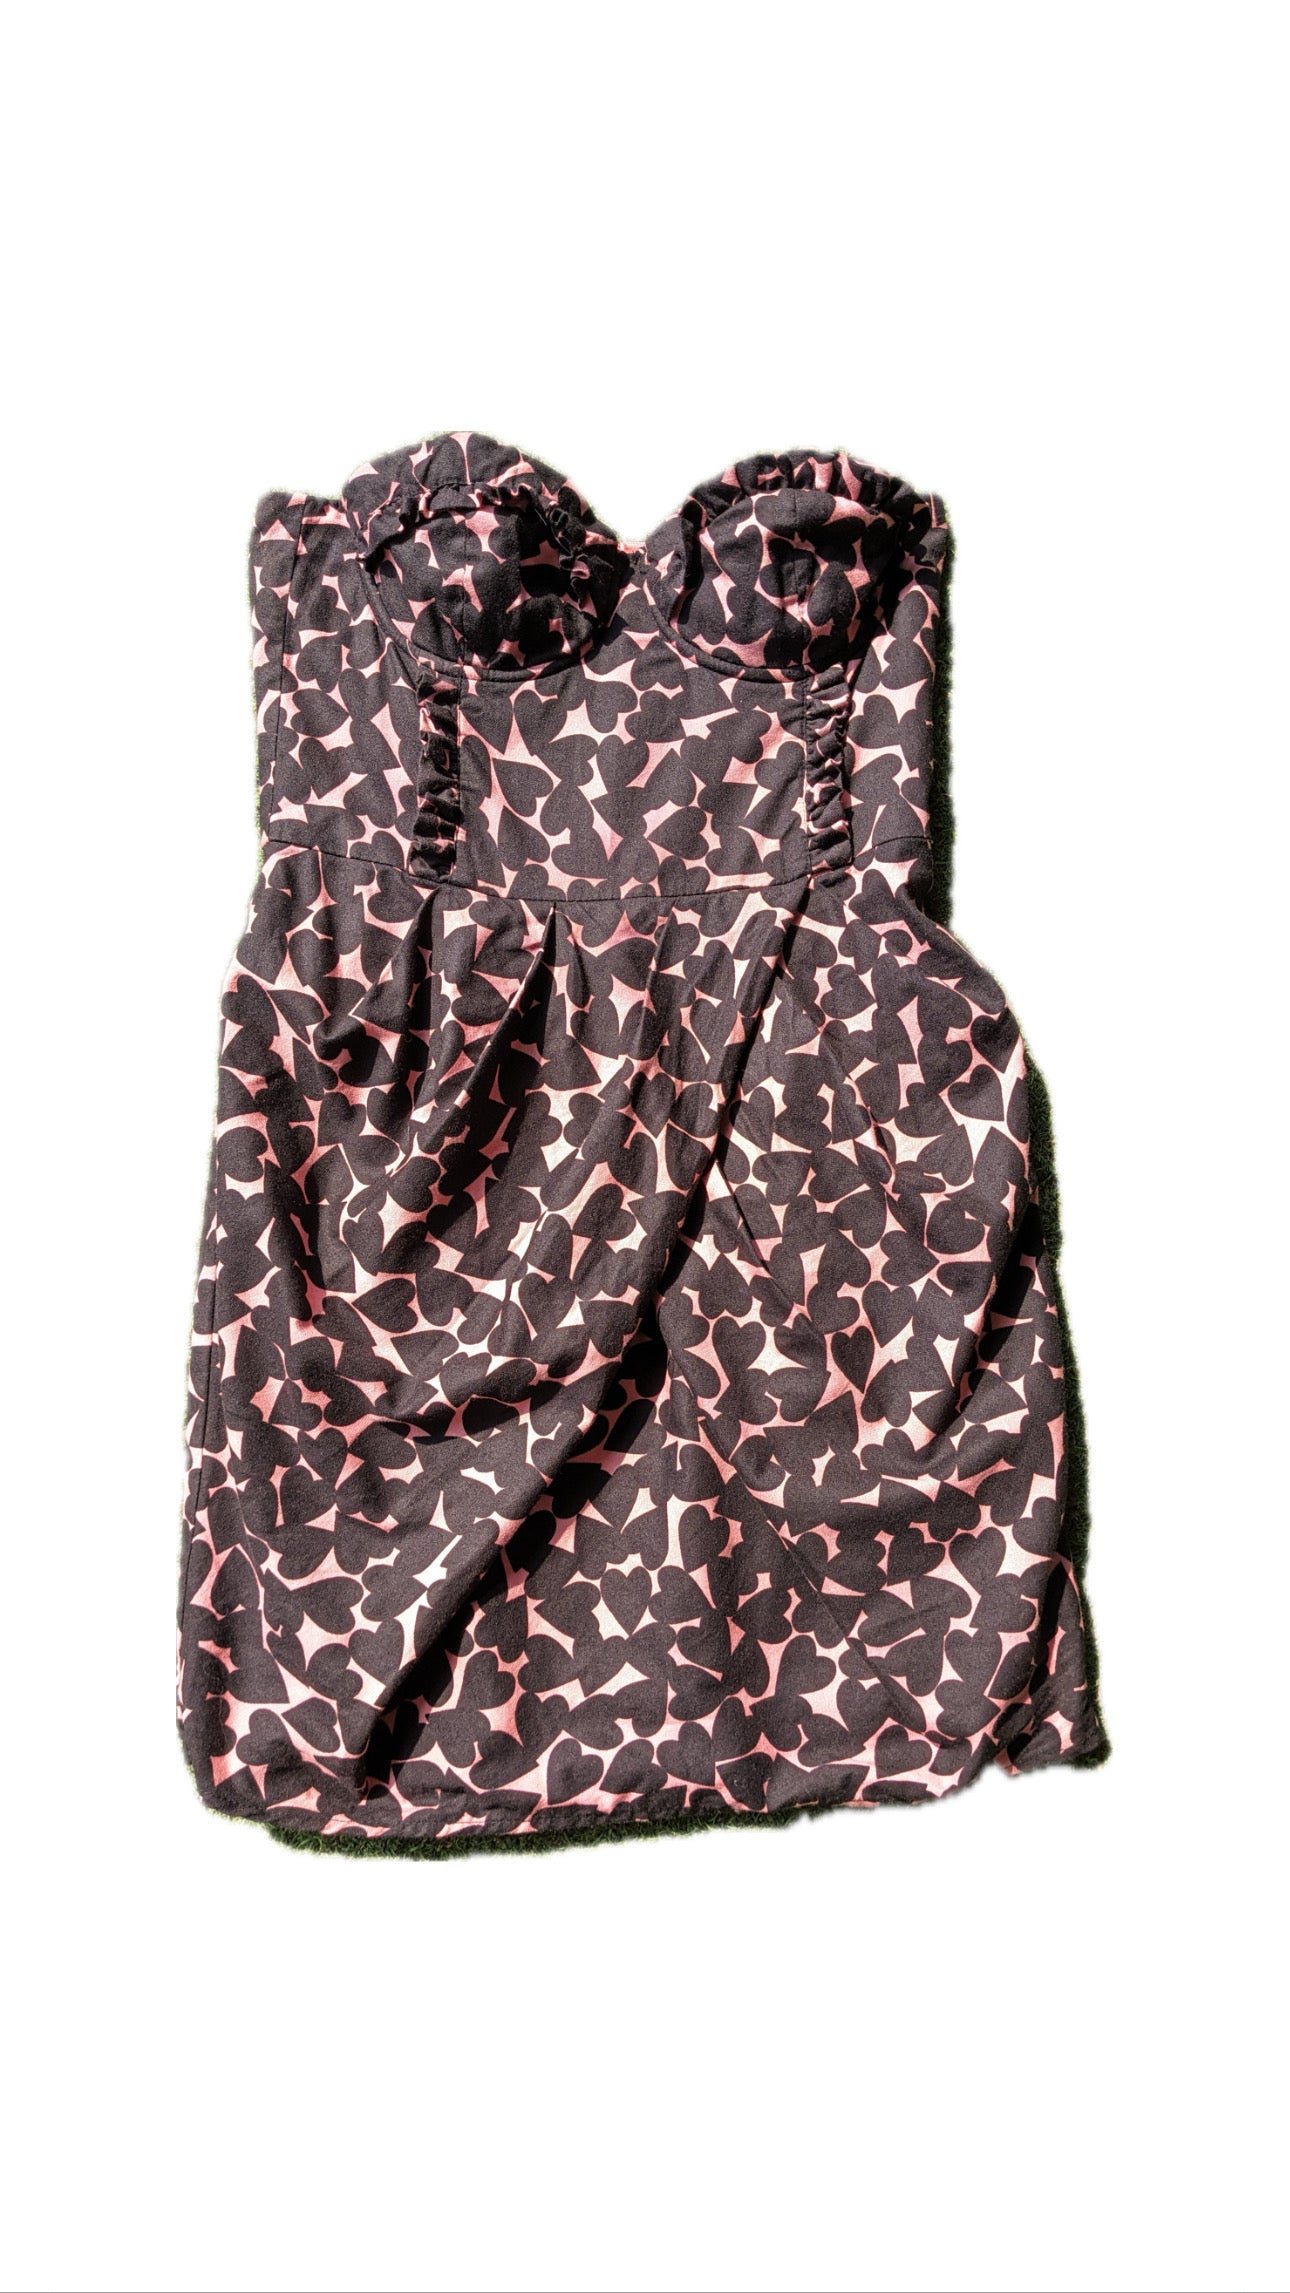 H&M Lined Strapless Pink With Black Heart Dress